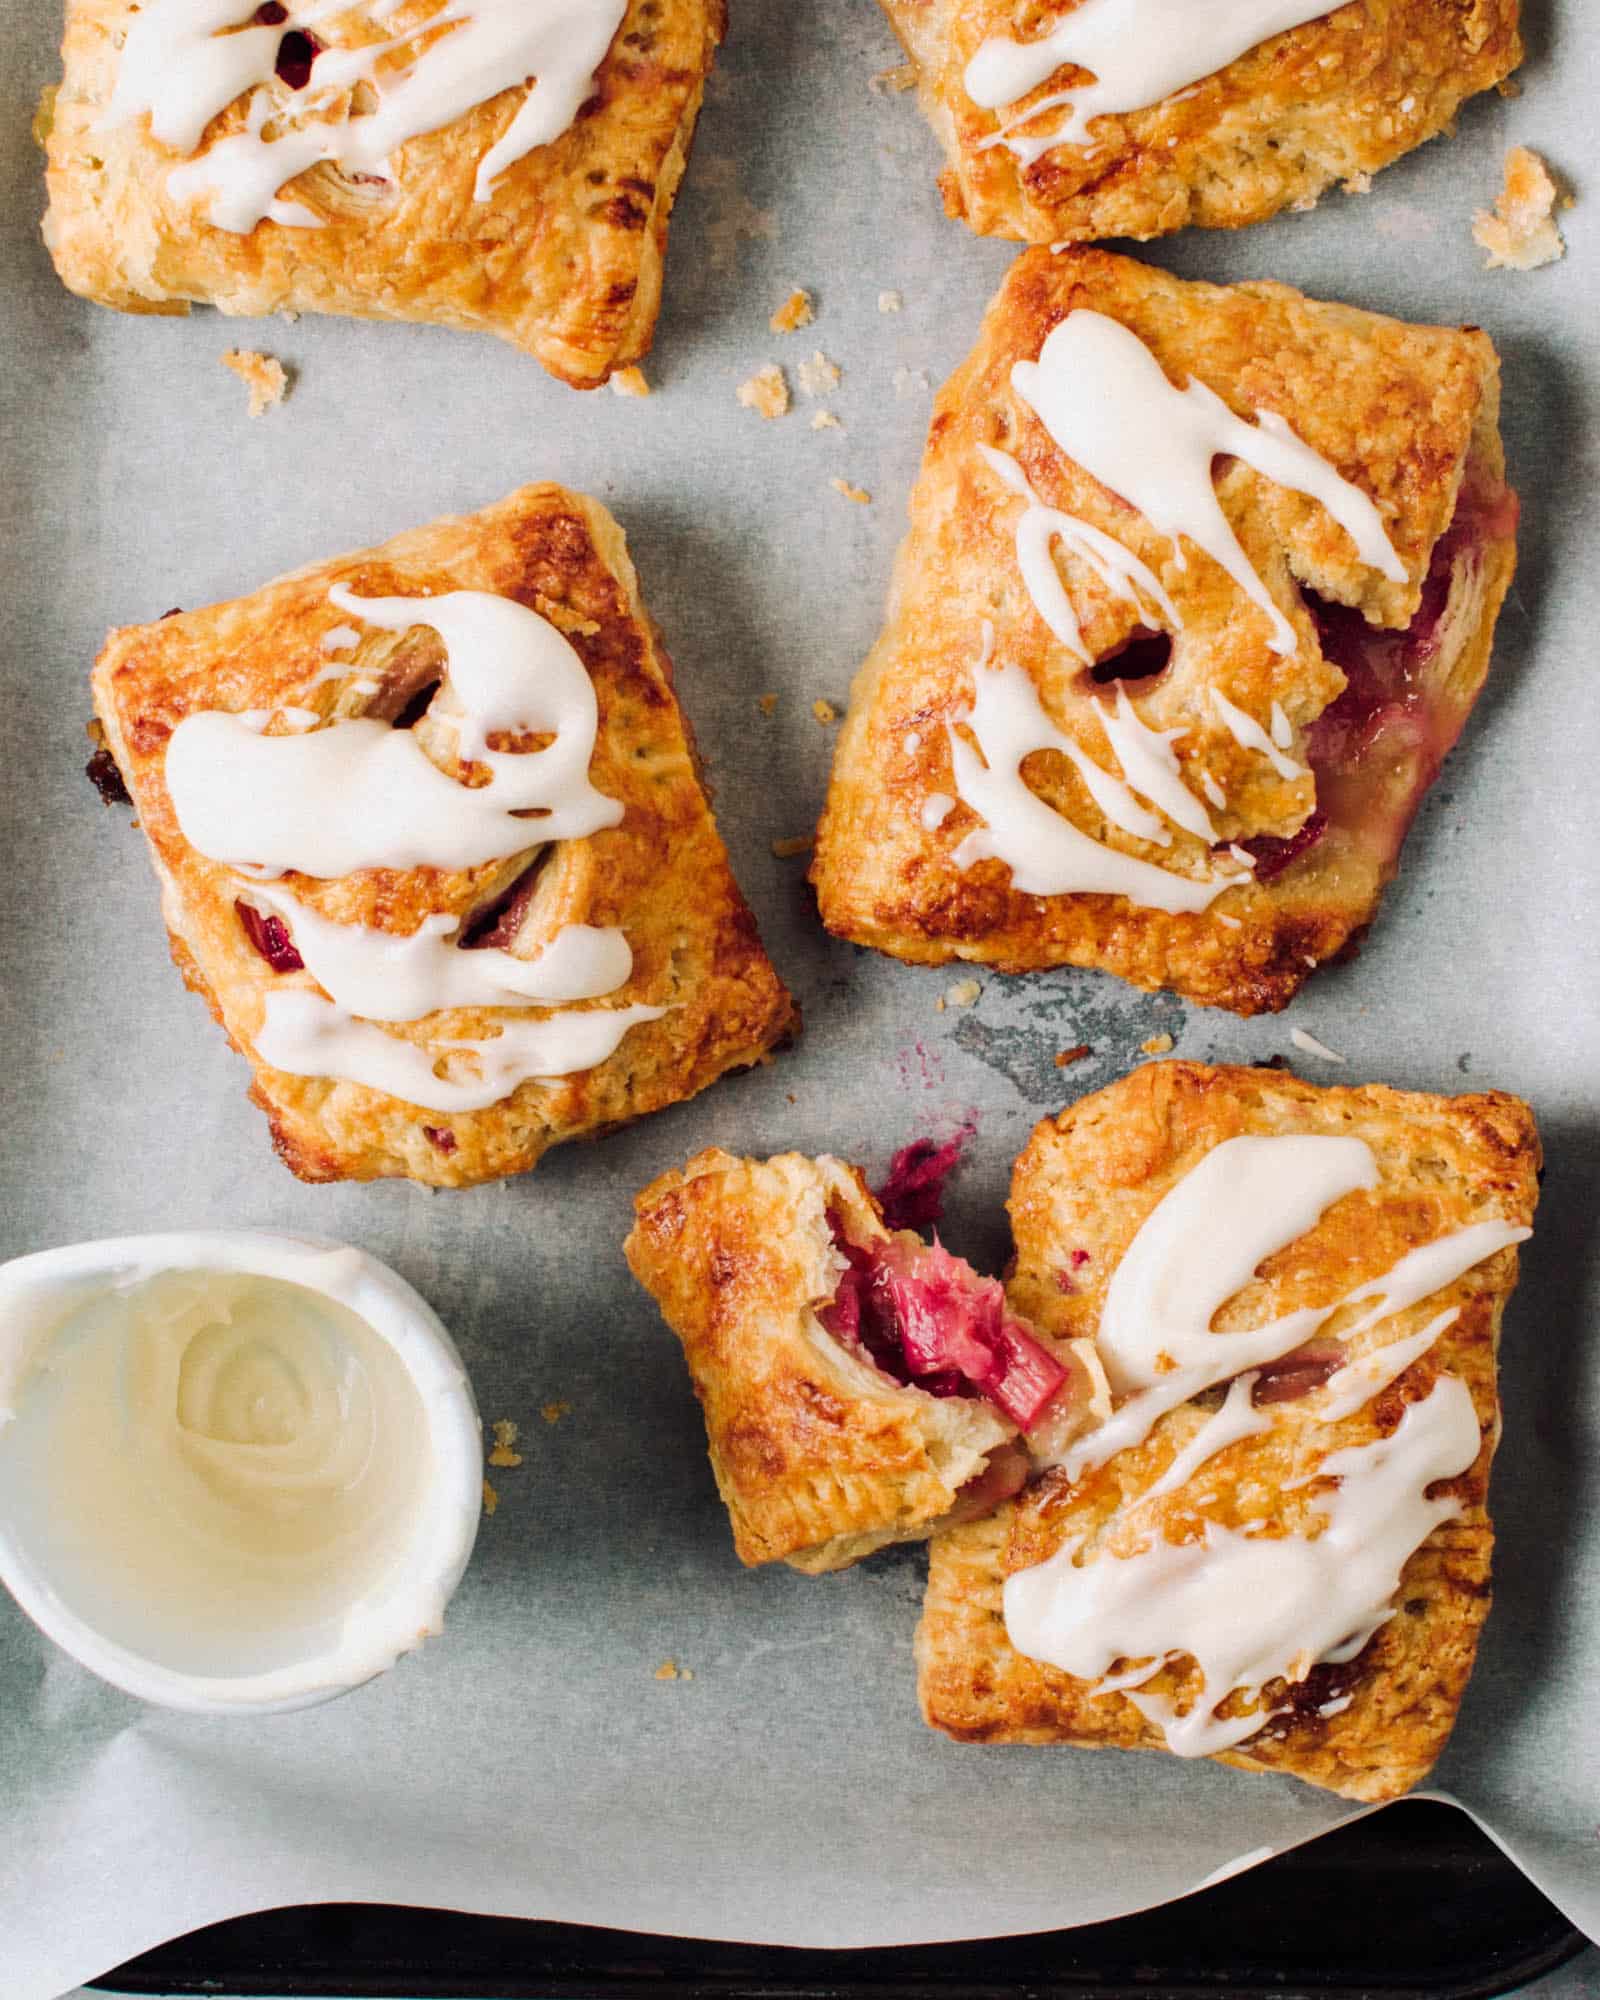 Rhubarb hand pies with icing on a tray.